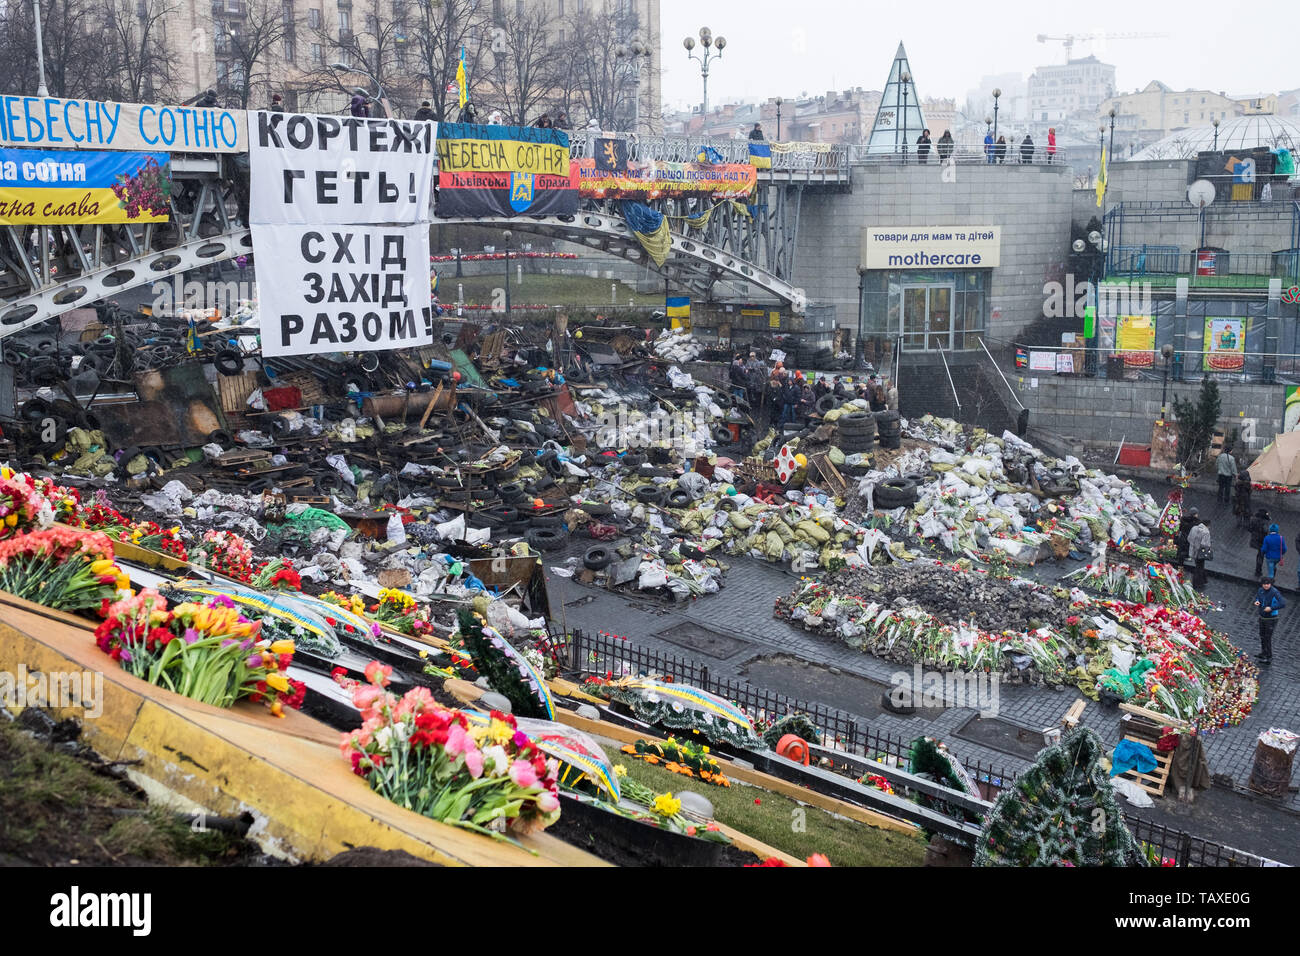 KIEV, UKRAINE - January 25, 2014: Mass anti-government protests in the center of Kiev. Barricades in the conflict zone on Hrushevskoho St. Stock Photo